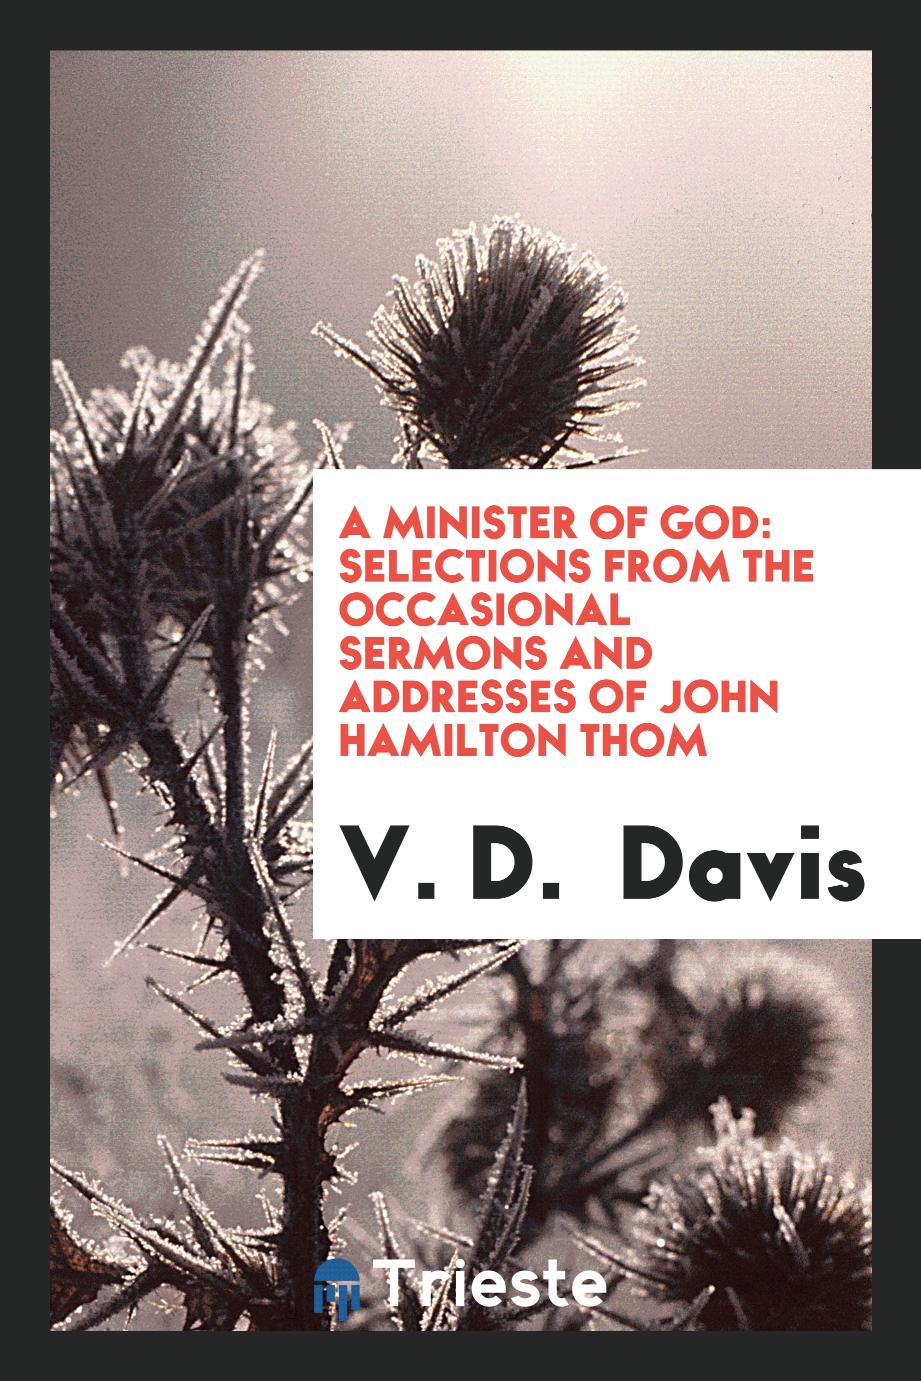 A Minister of God: Selections from the Occasional Sermons and Addresses of John Hamilton Thom